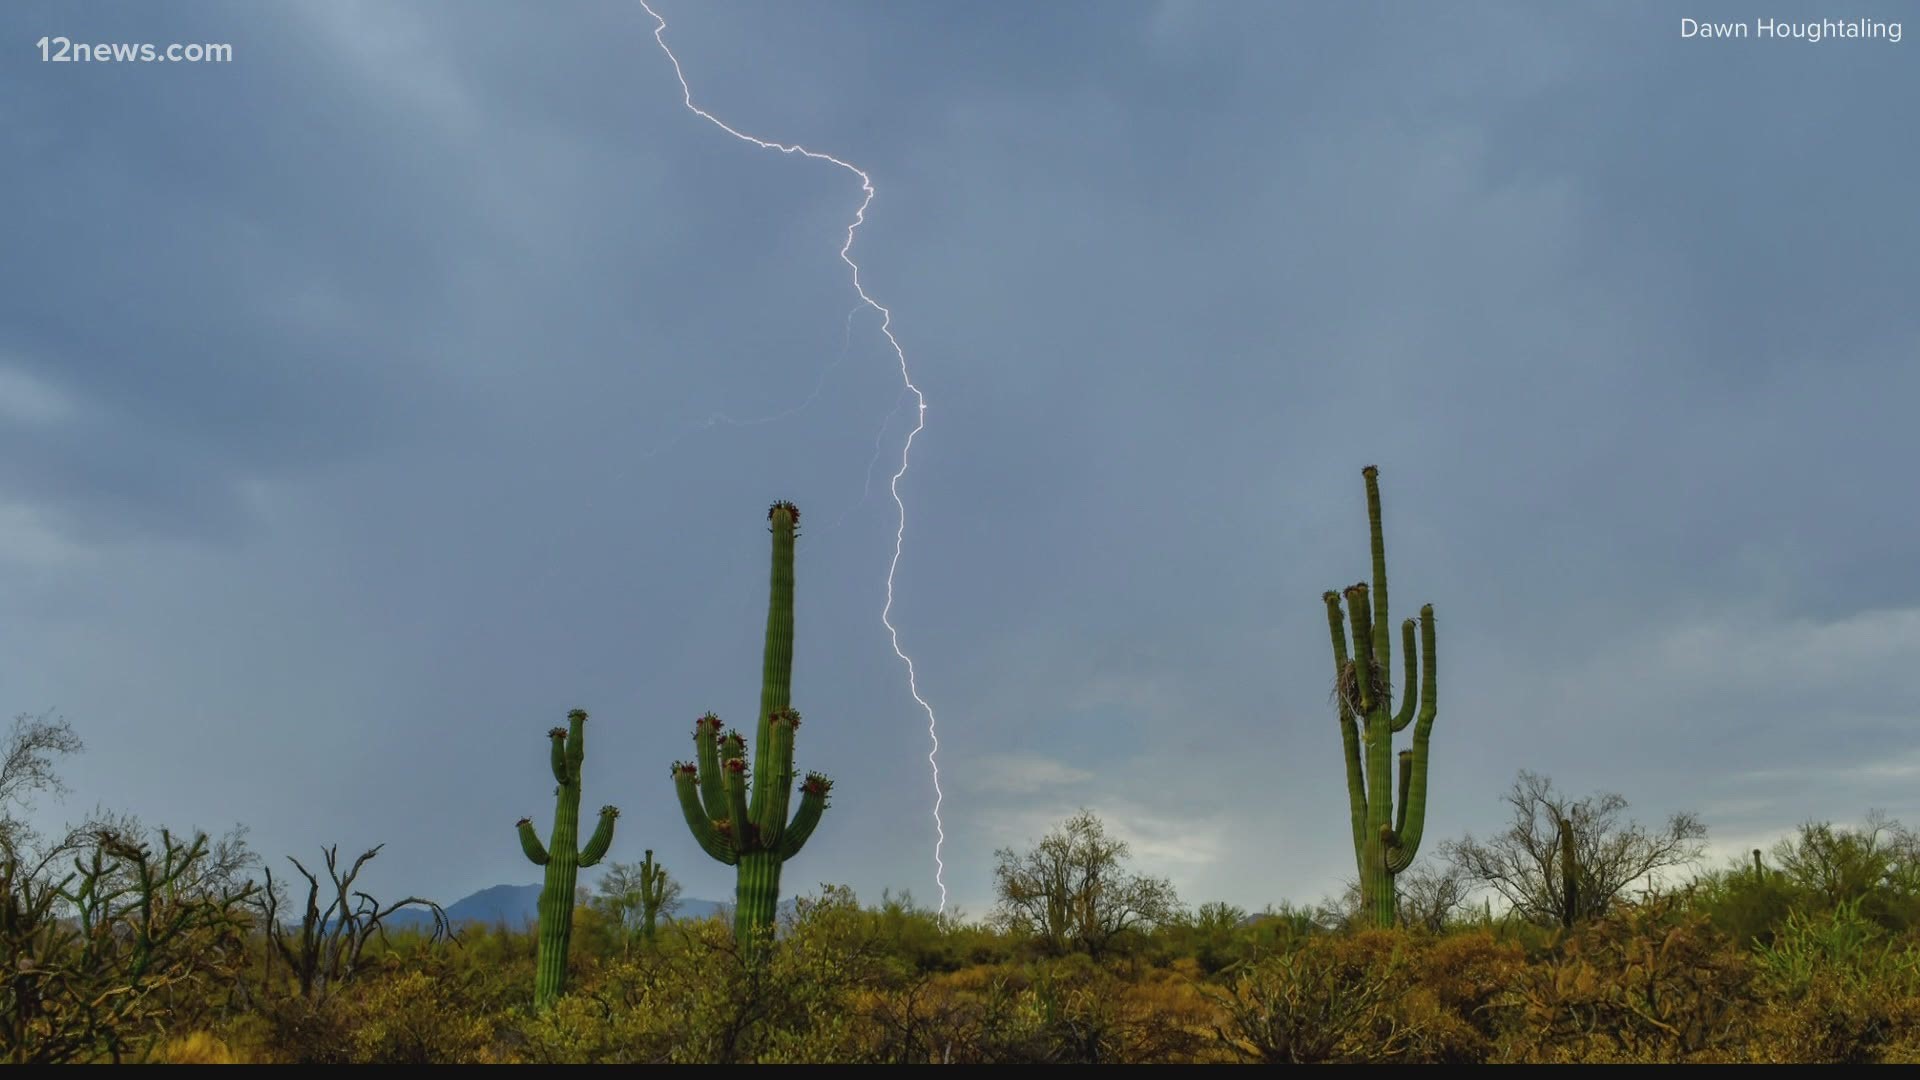 Monsoon 2021 is picking up. Storms hit the Valley on Wednesday bringing heavy rain, thunder and lightning. 0.17 of an inch of rain fell at Sky Harbor Airport.